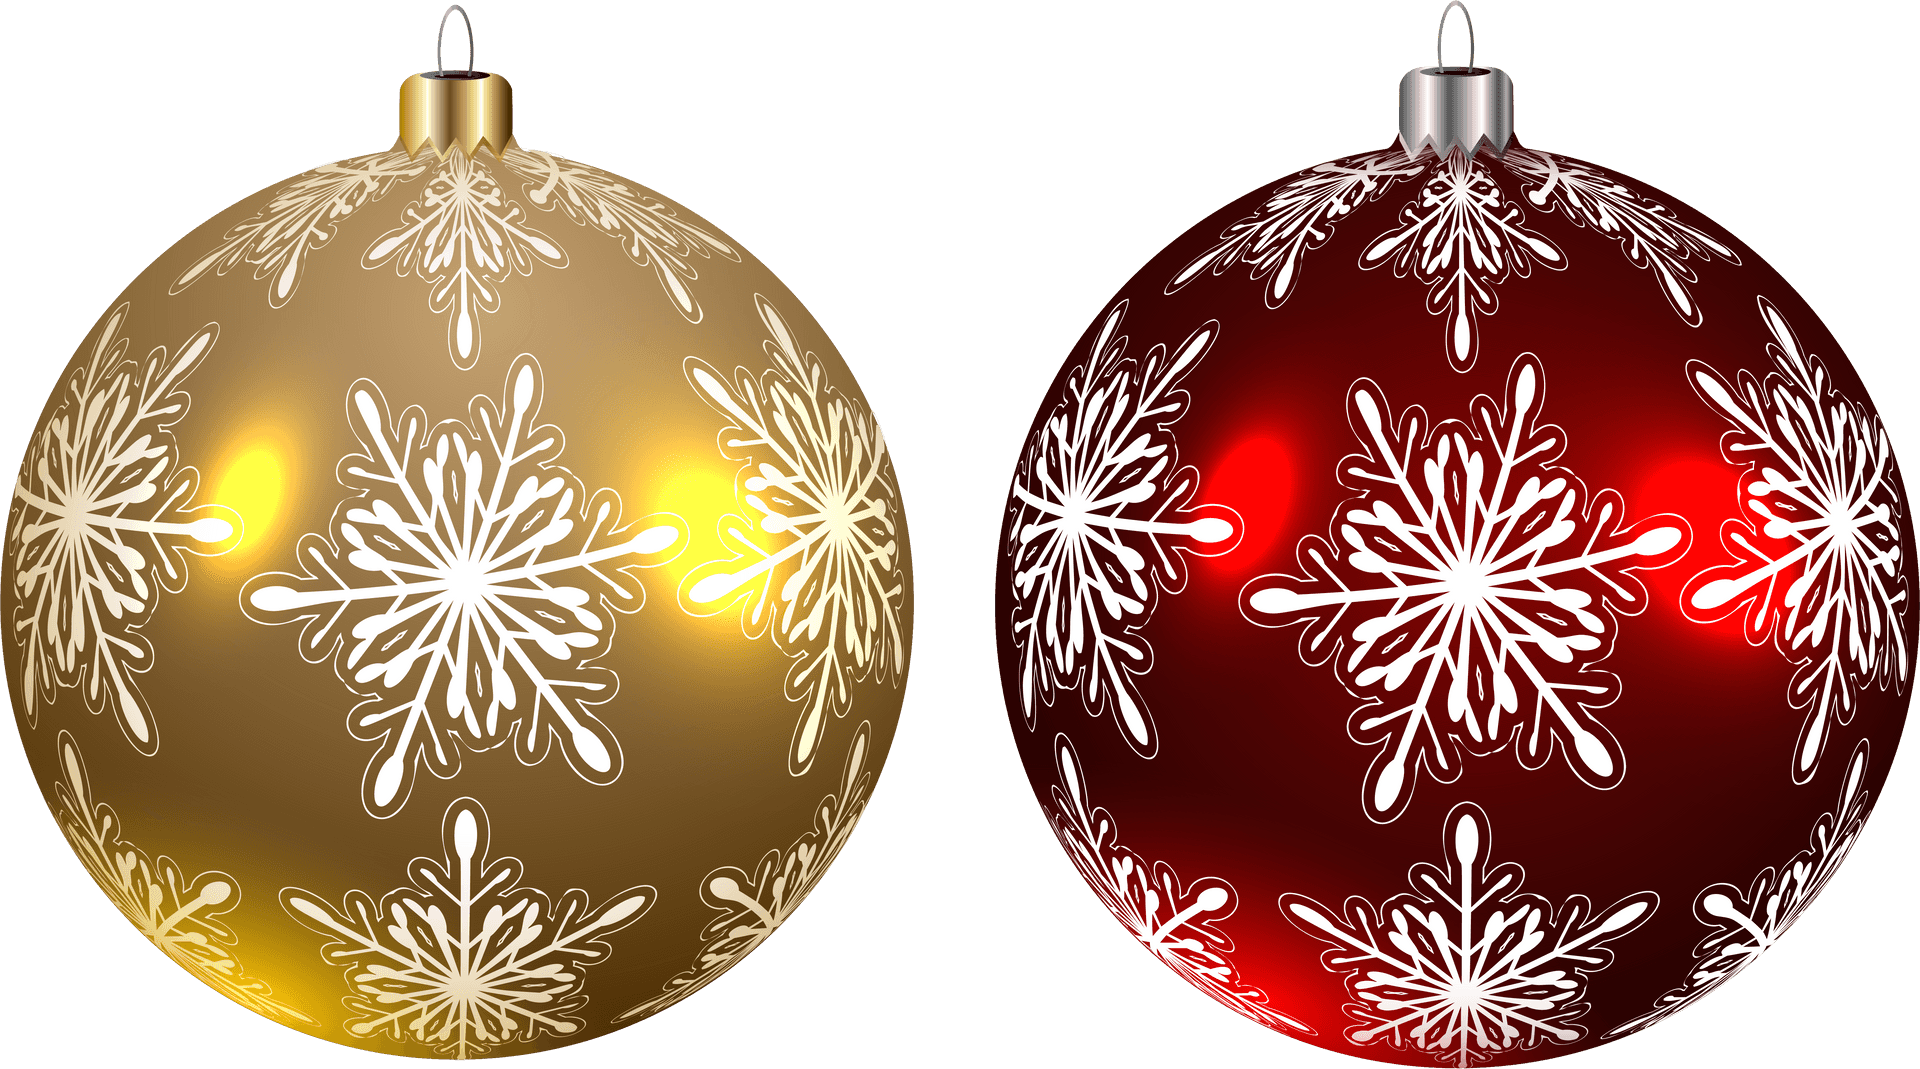 Goldenand Red Christmas Ballswith Snowflake Patterns PNG